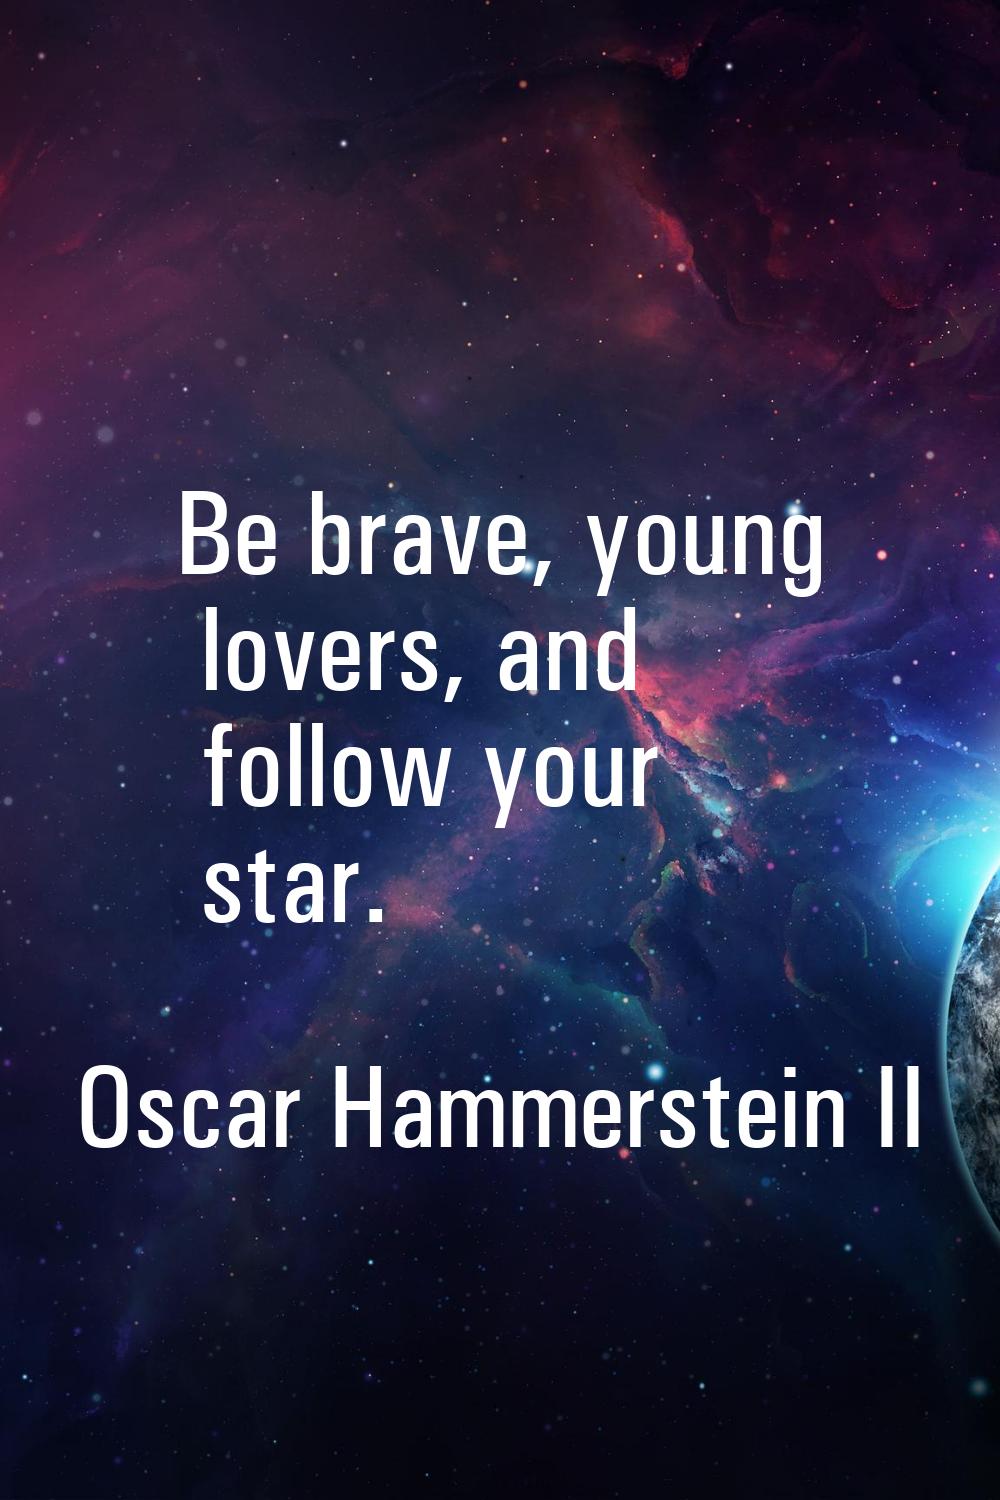 Be brave, young lovers, and follow your star.